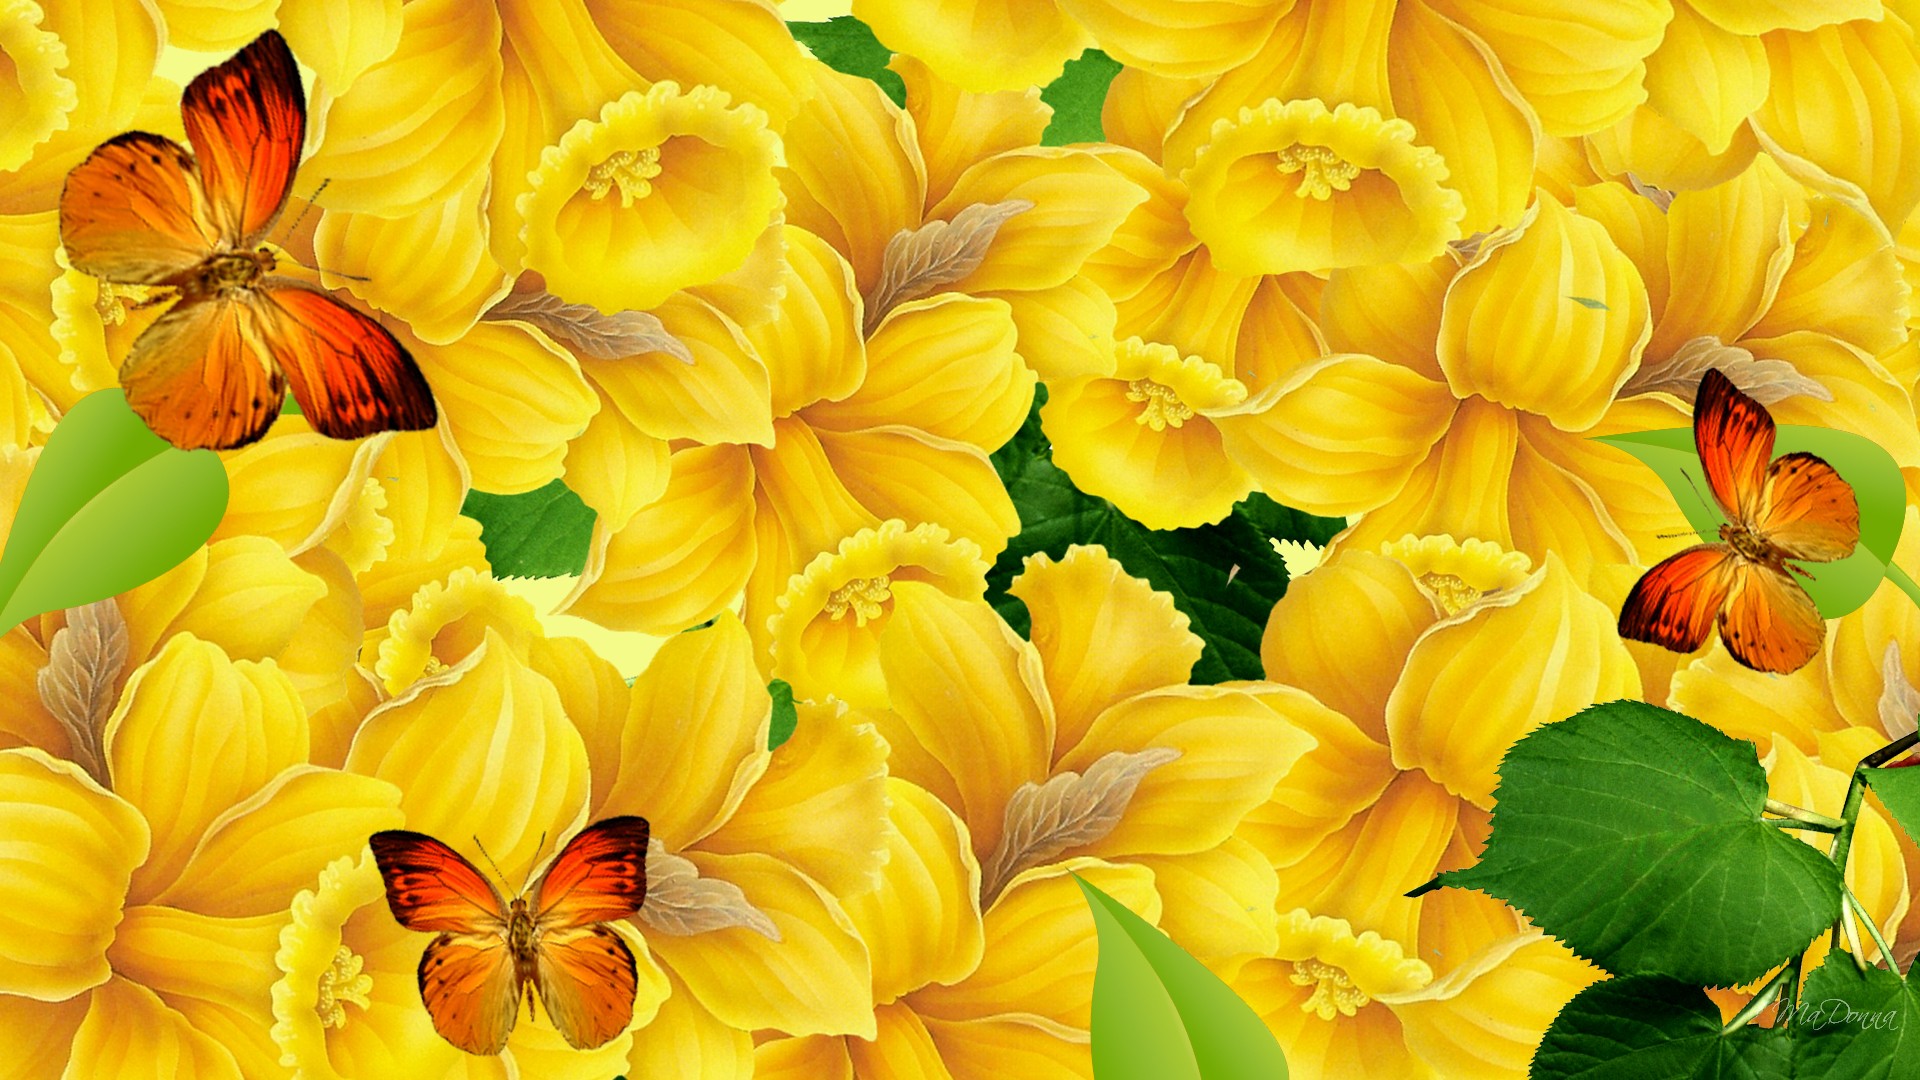 Awesome 3d Butterfly Wallpaper Unique HD